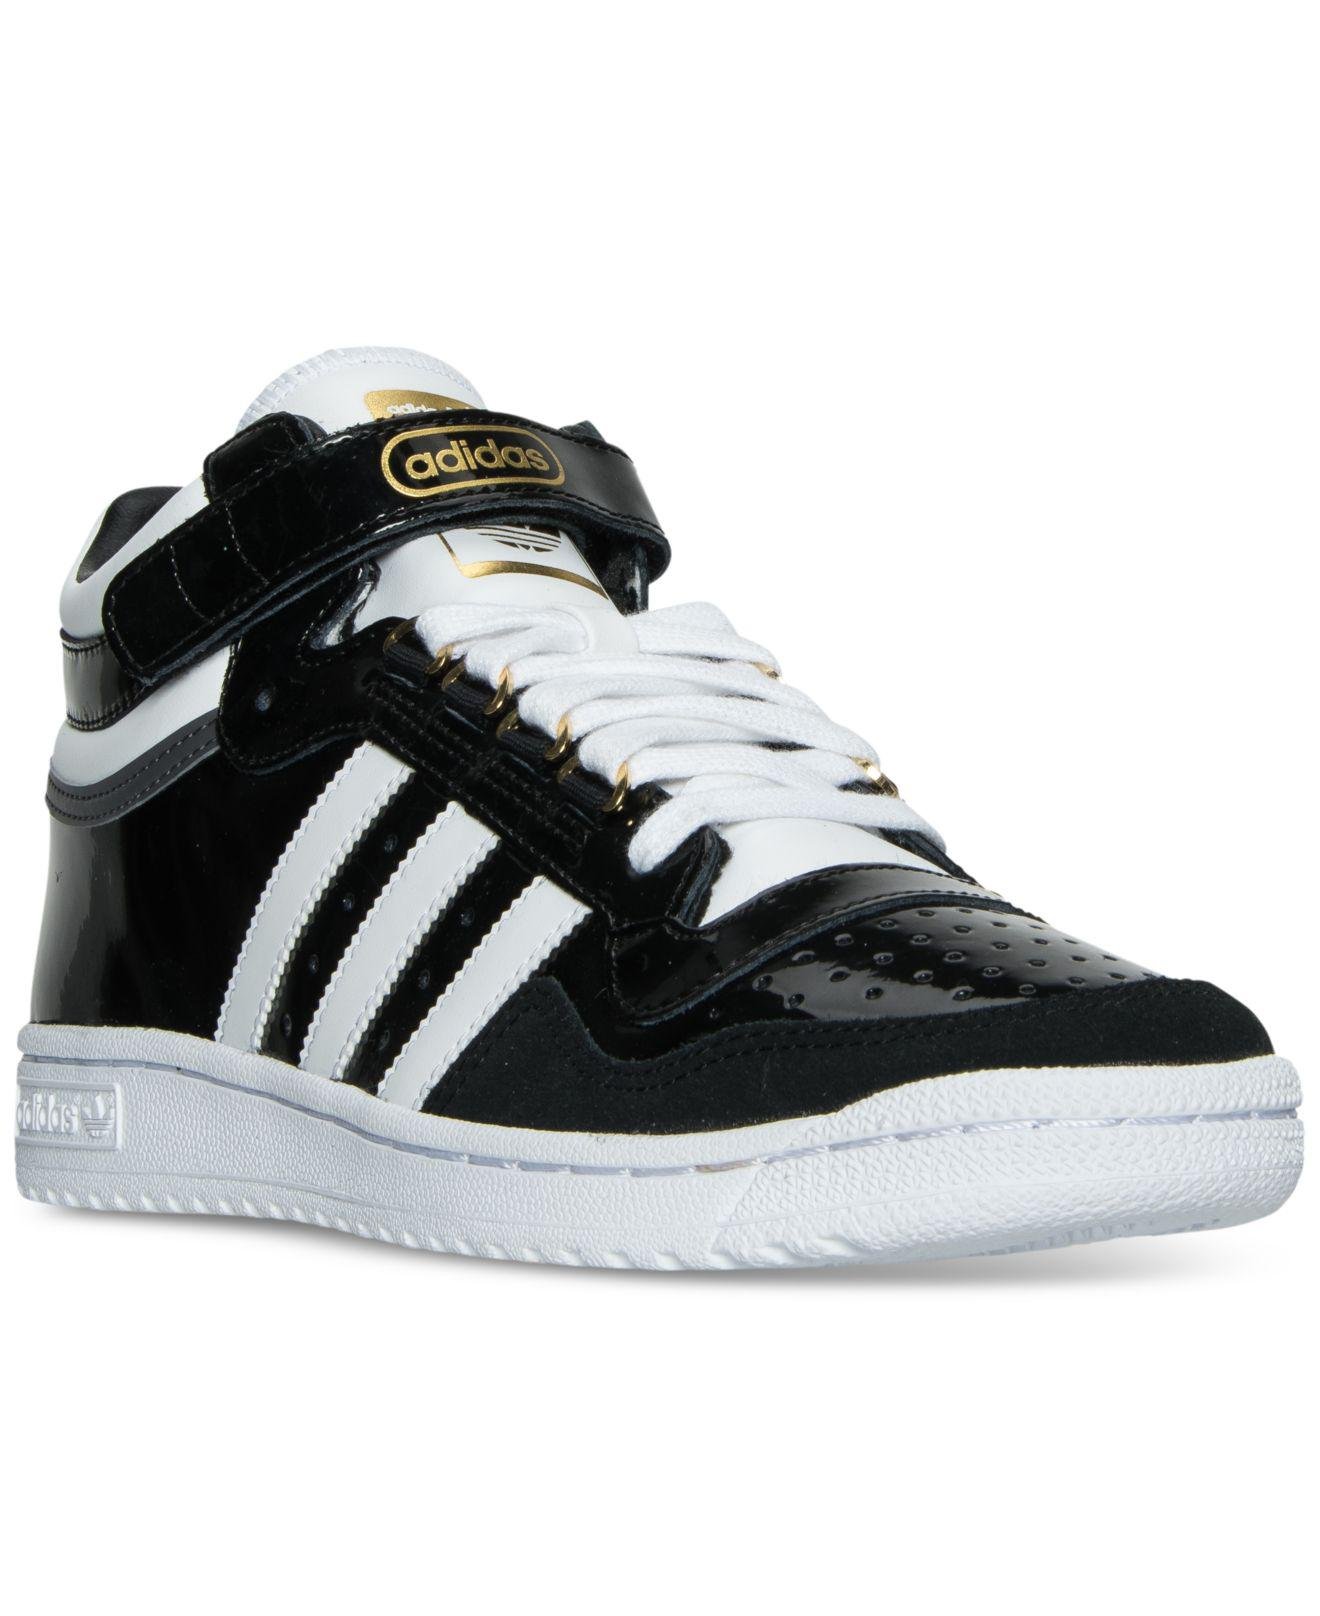 screen All kinds of love adidas concord high tops Expectation exempt Asian